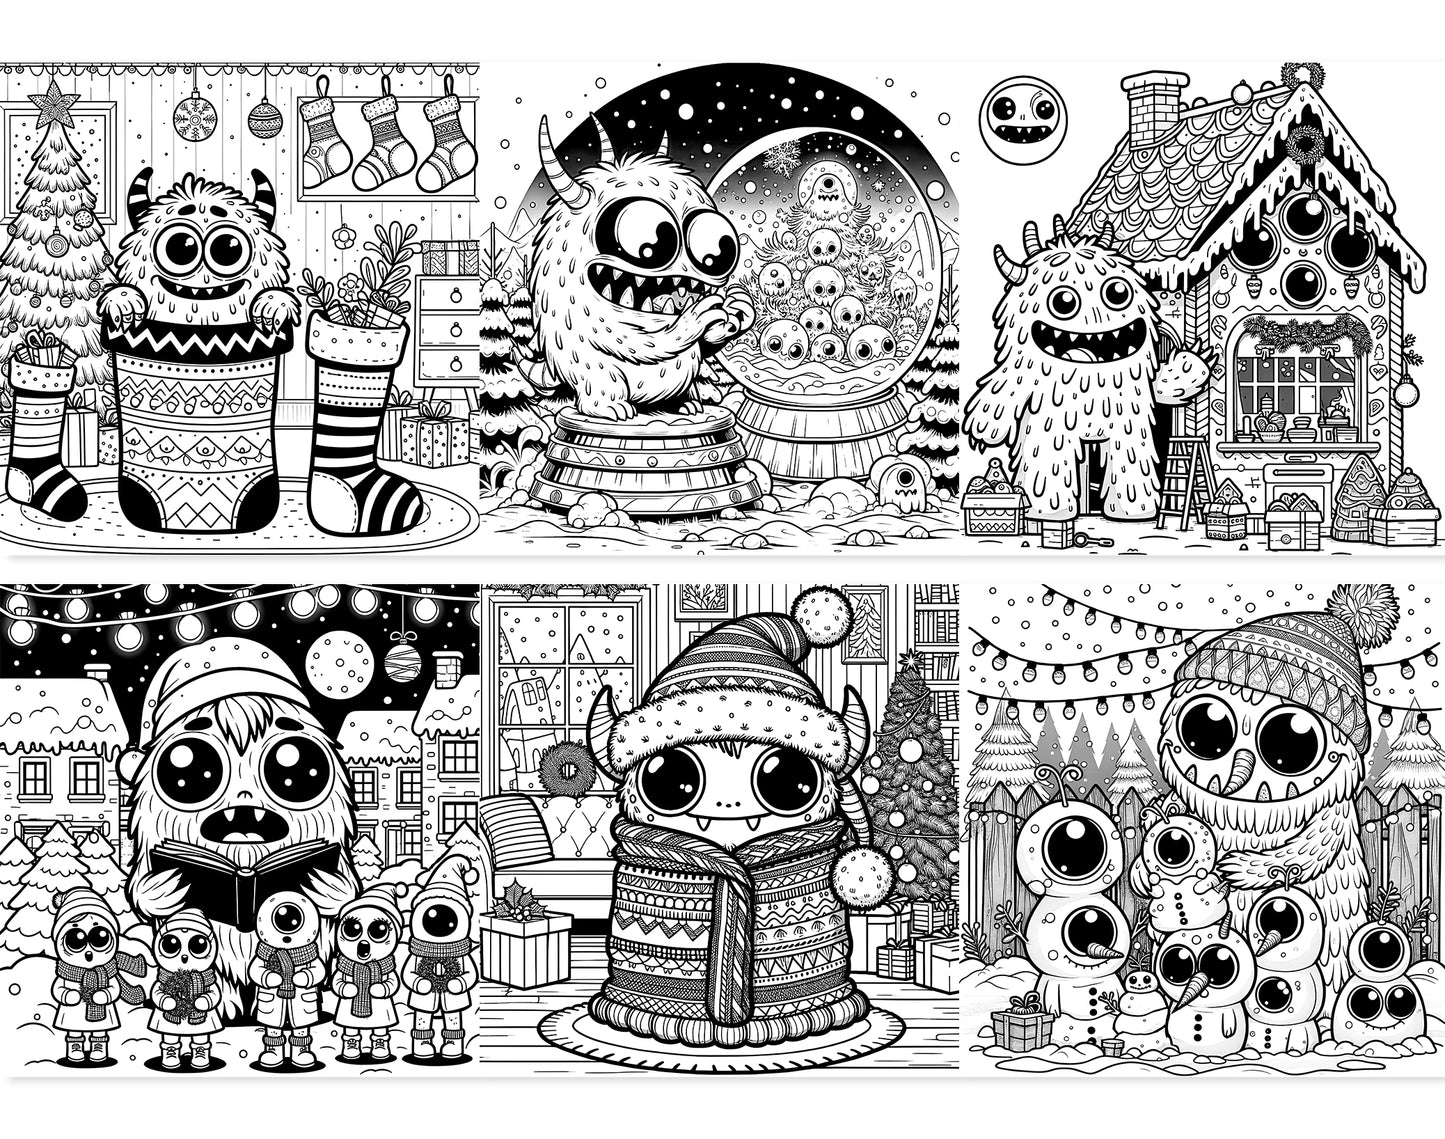 55 Adorable Creepy Christmas Monsters Coloring Pages - Instant Download - Printable PDF